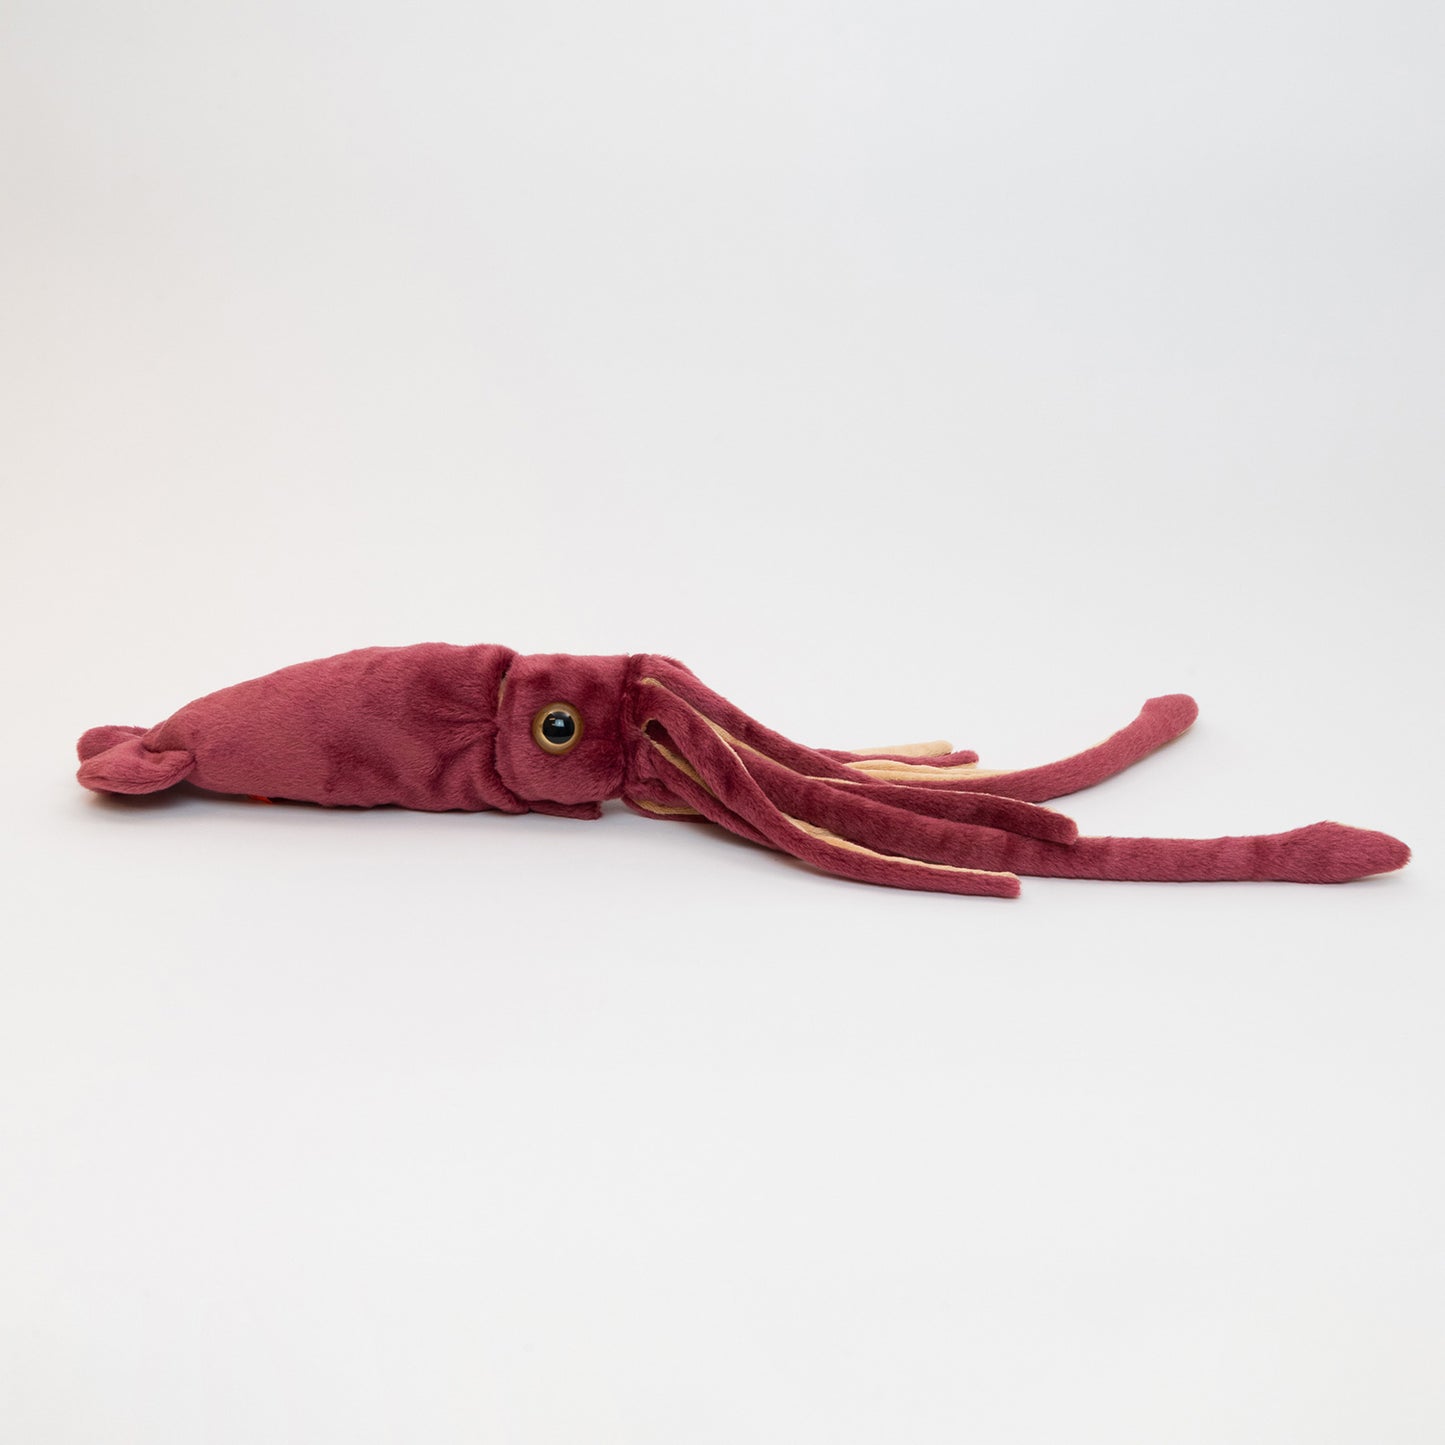 A red plush squid pictured on a white background.